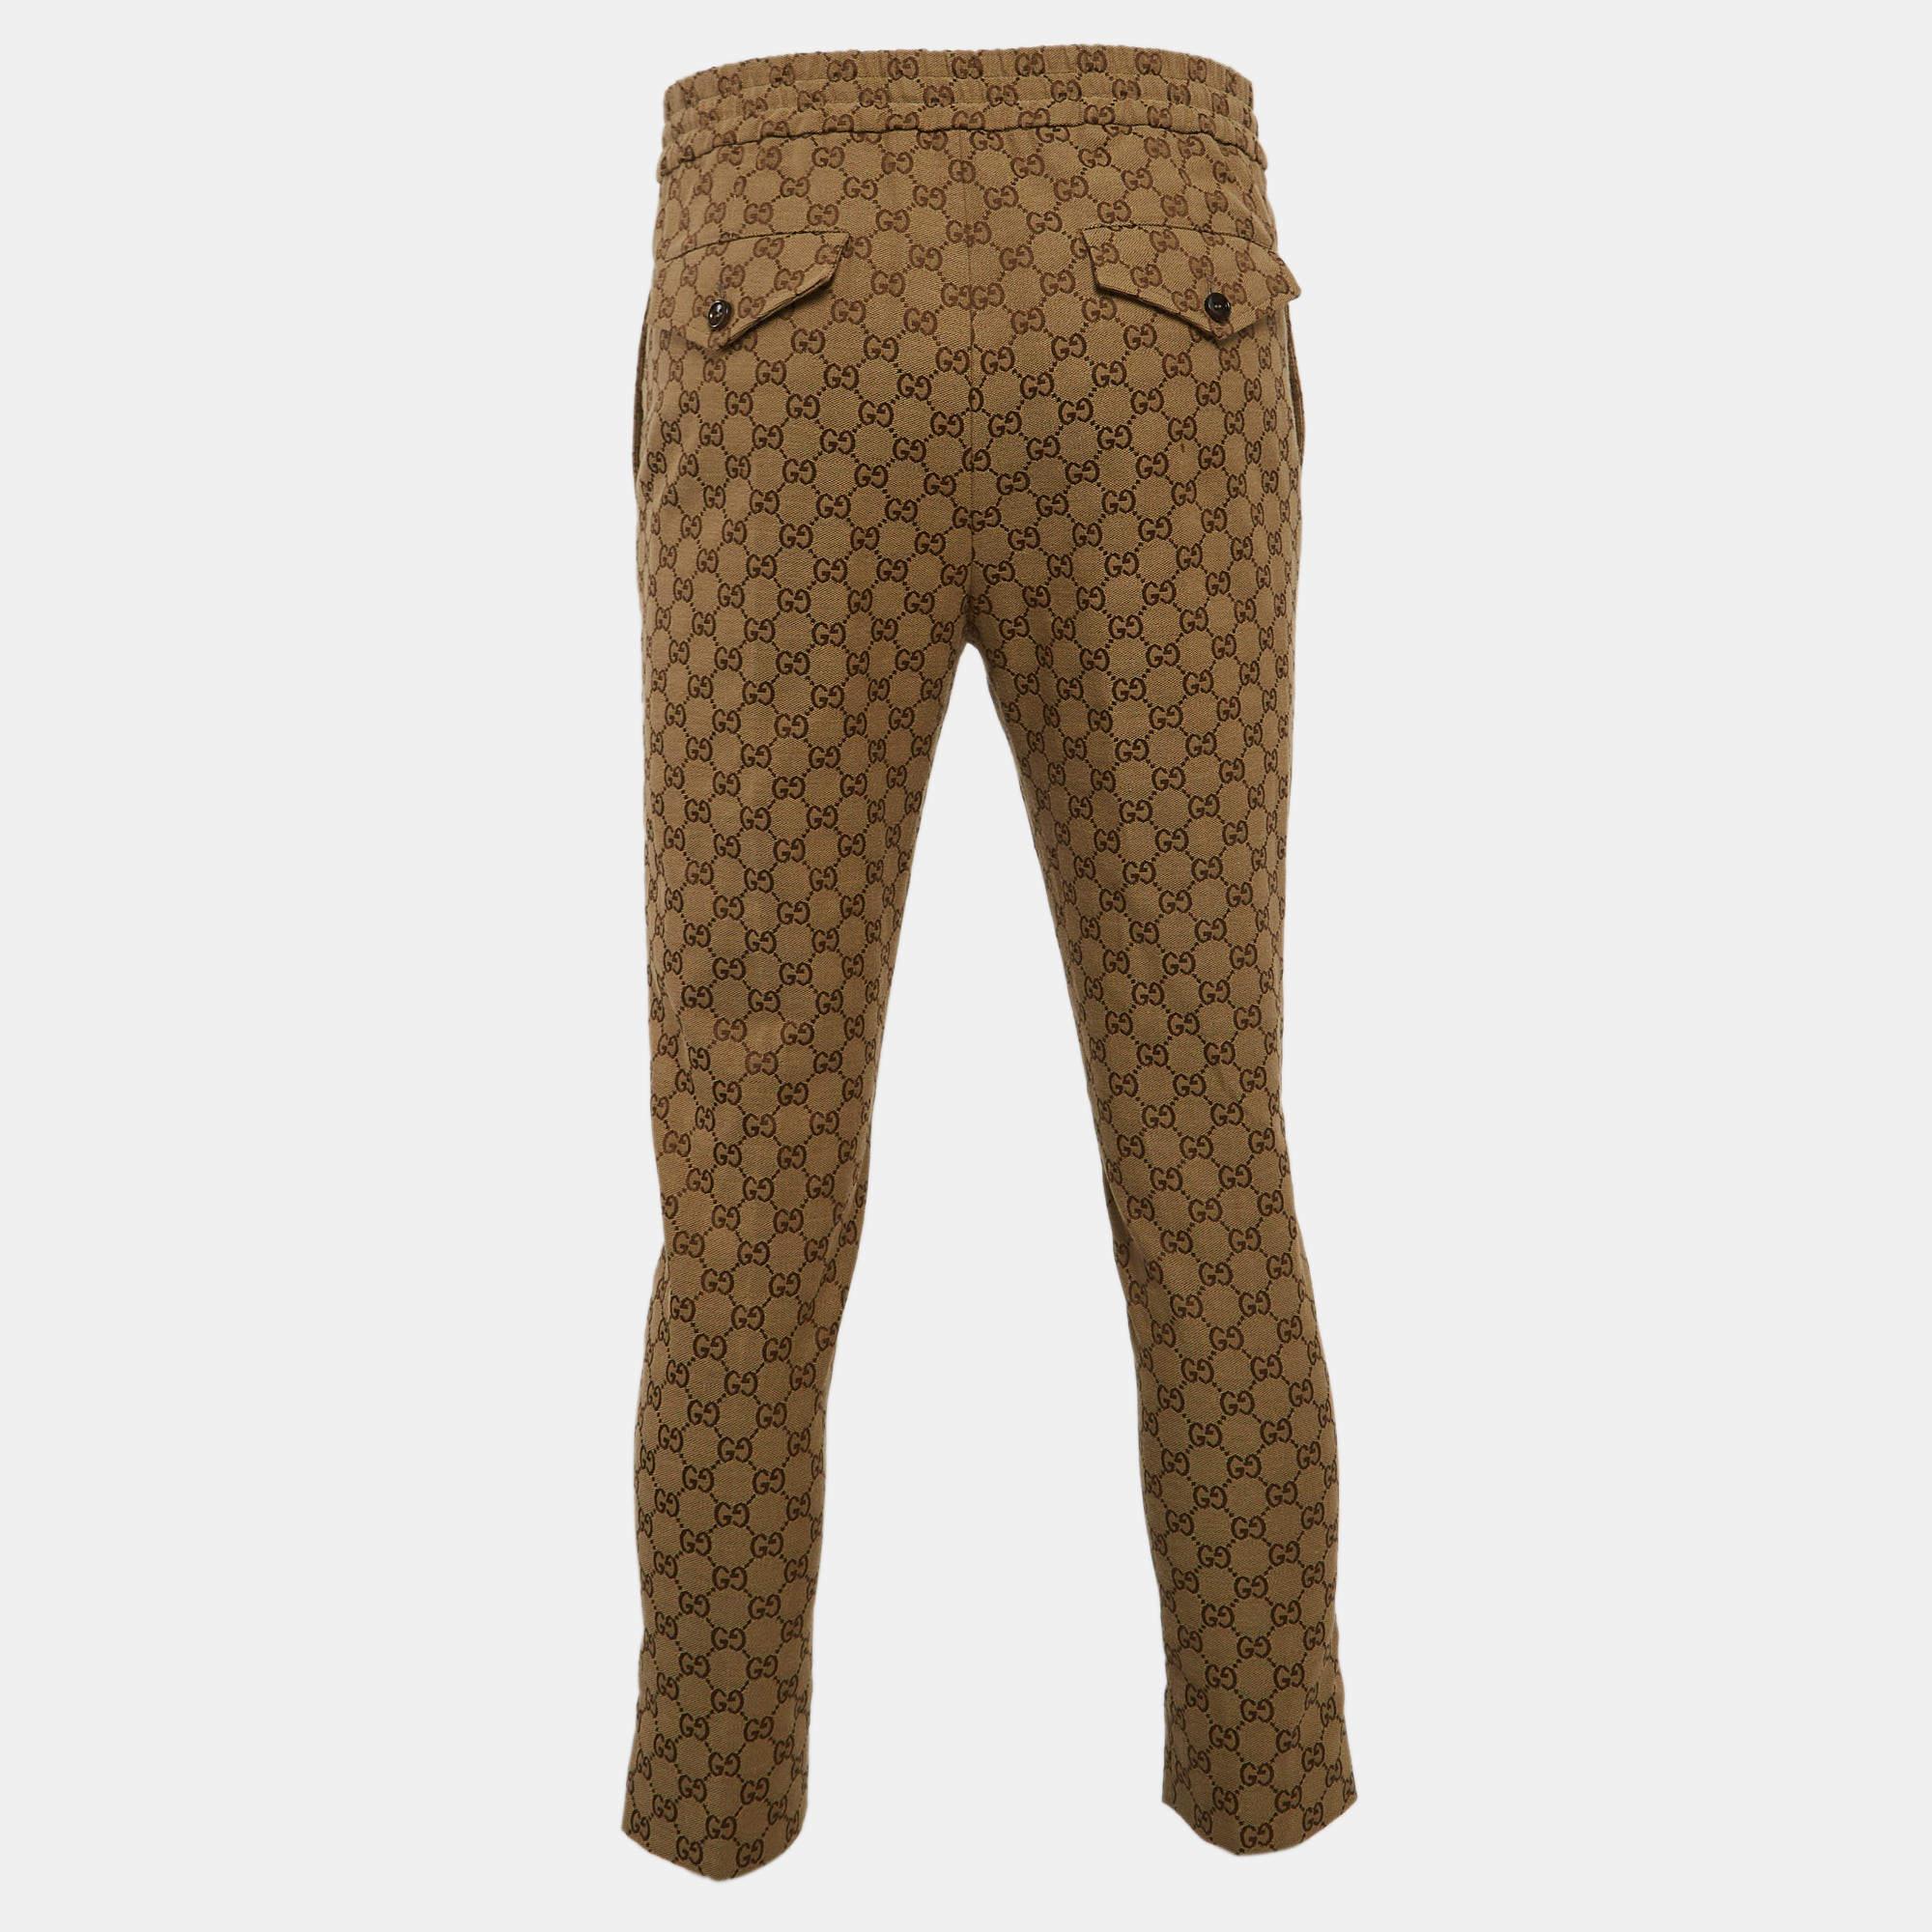 Enhance your attire with this pair of Gucci trousers. Designed into a superb silhouette and fit, this pair of trousers will definitely make you look elegant.

